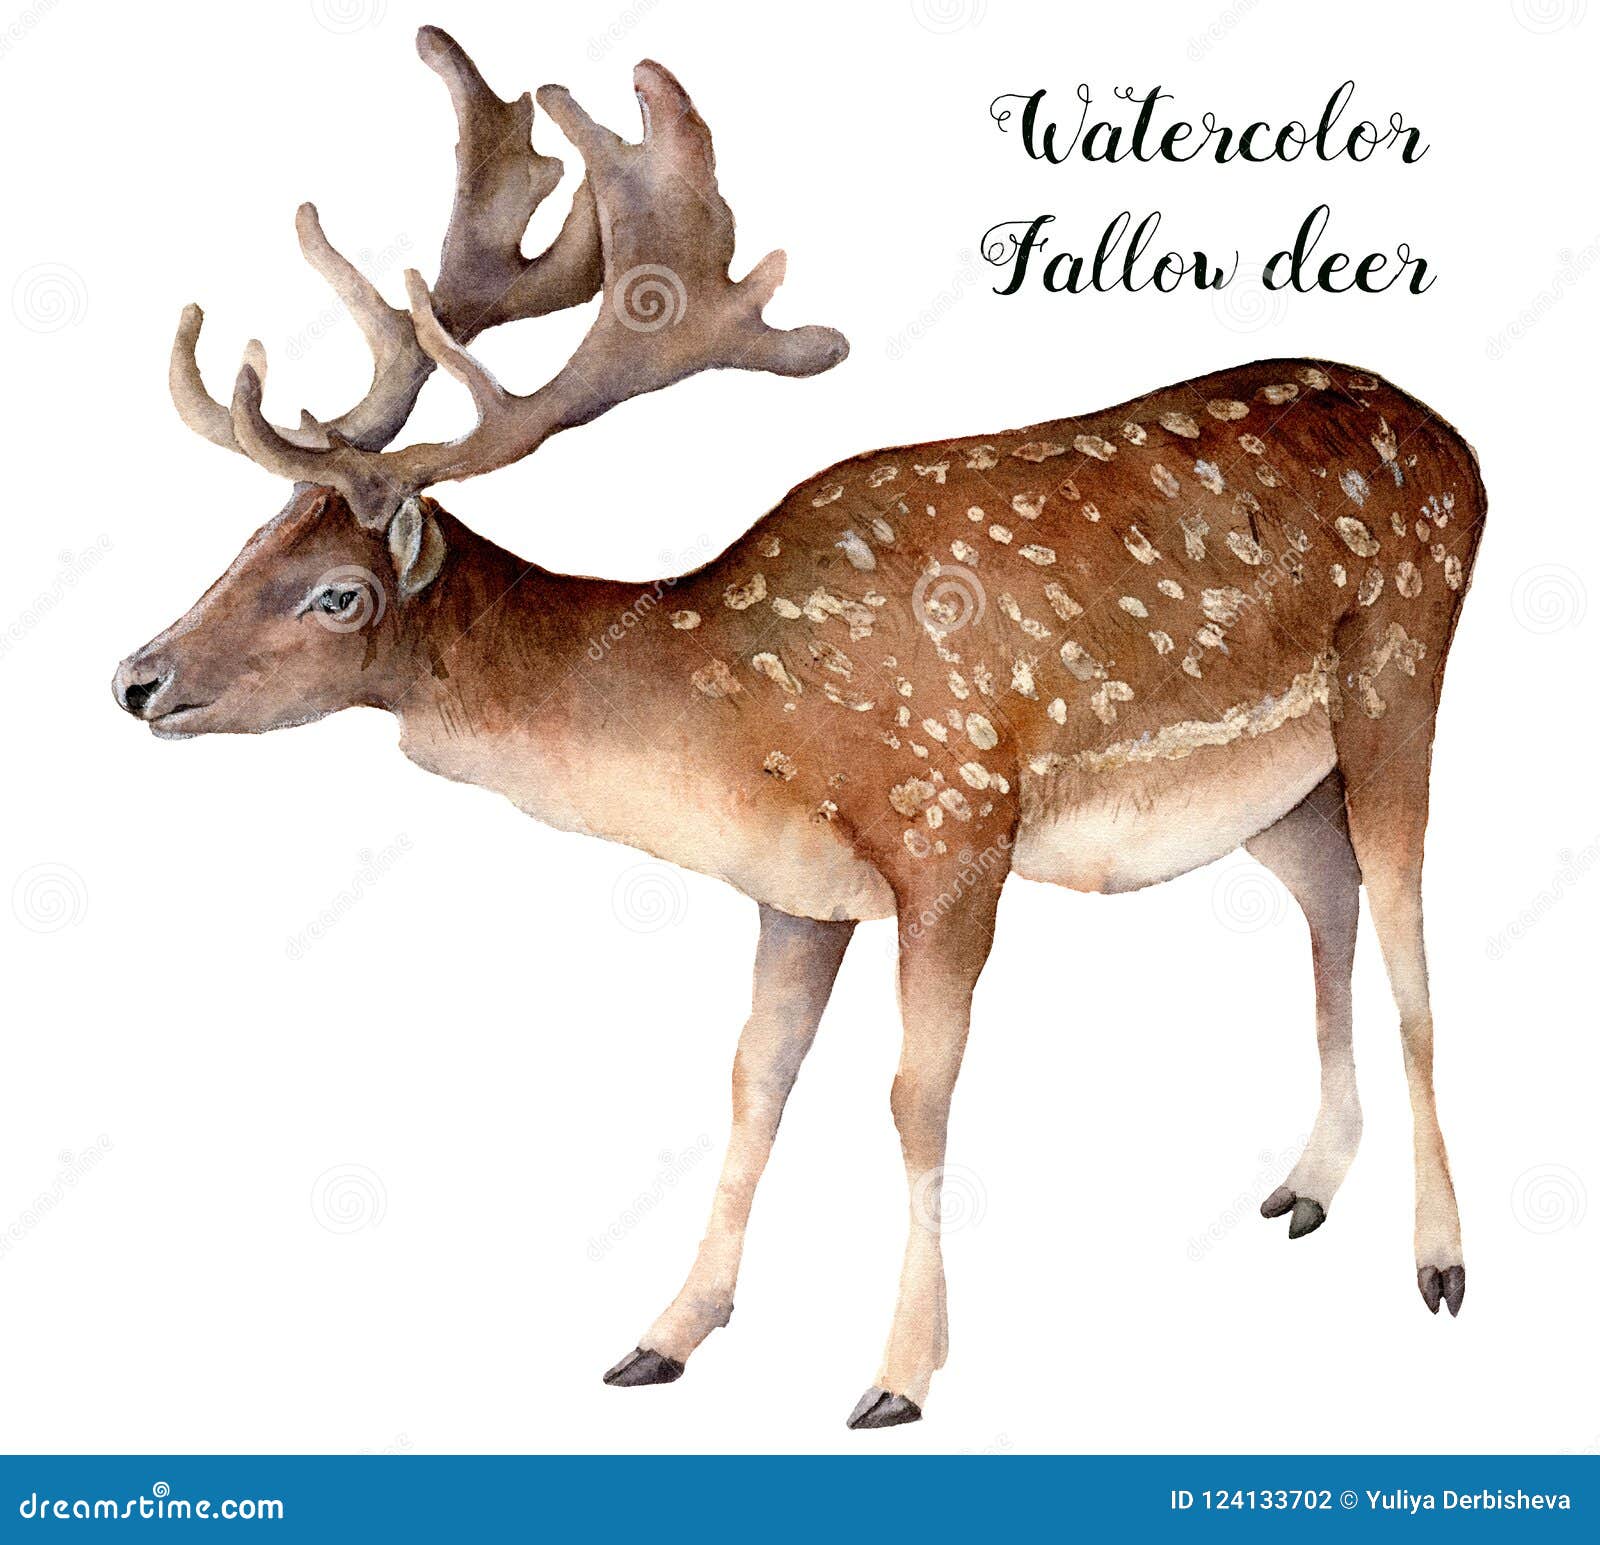 Easy How to Draw a Deer Guide | Skip To My Lou